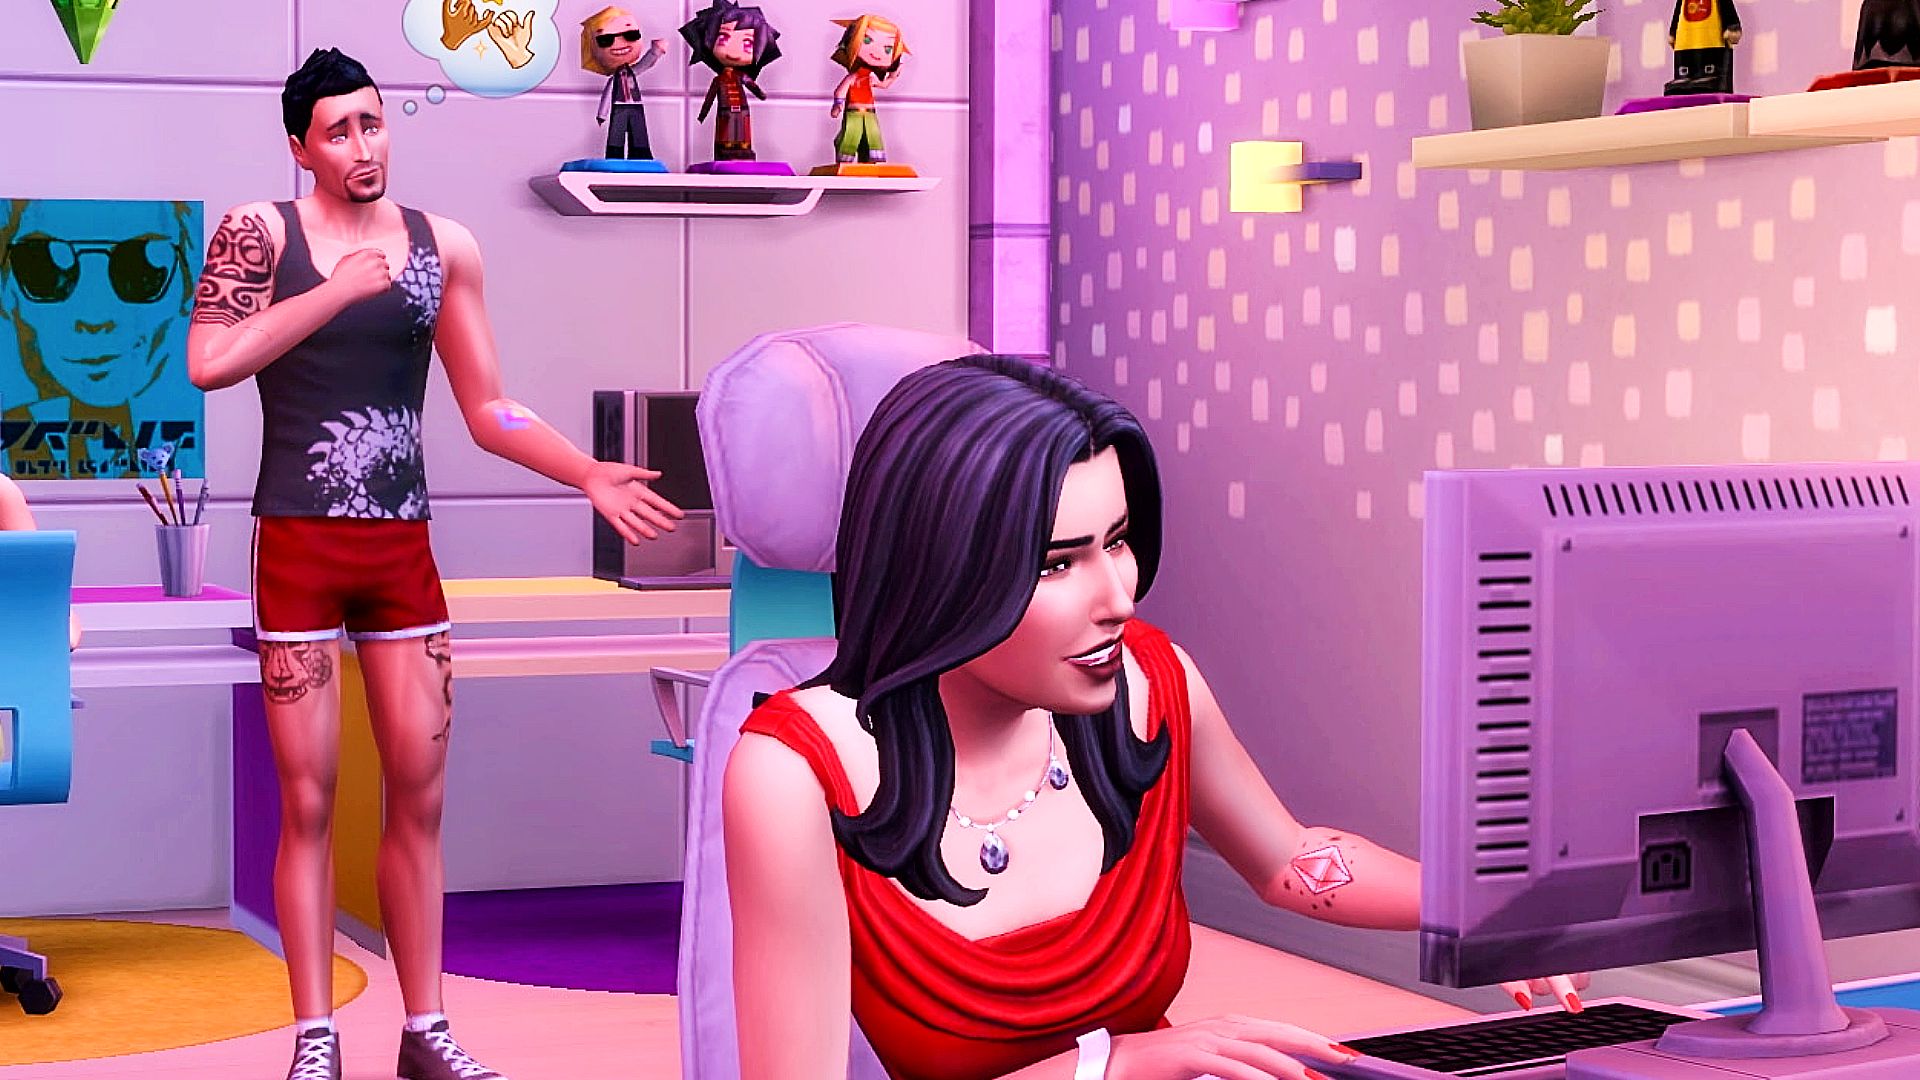 Sims 5 release date estimate, Project Rene, gameplay, and wishlist